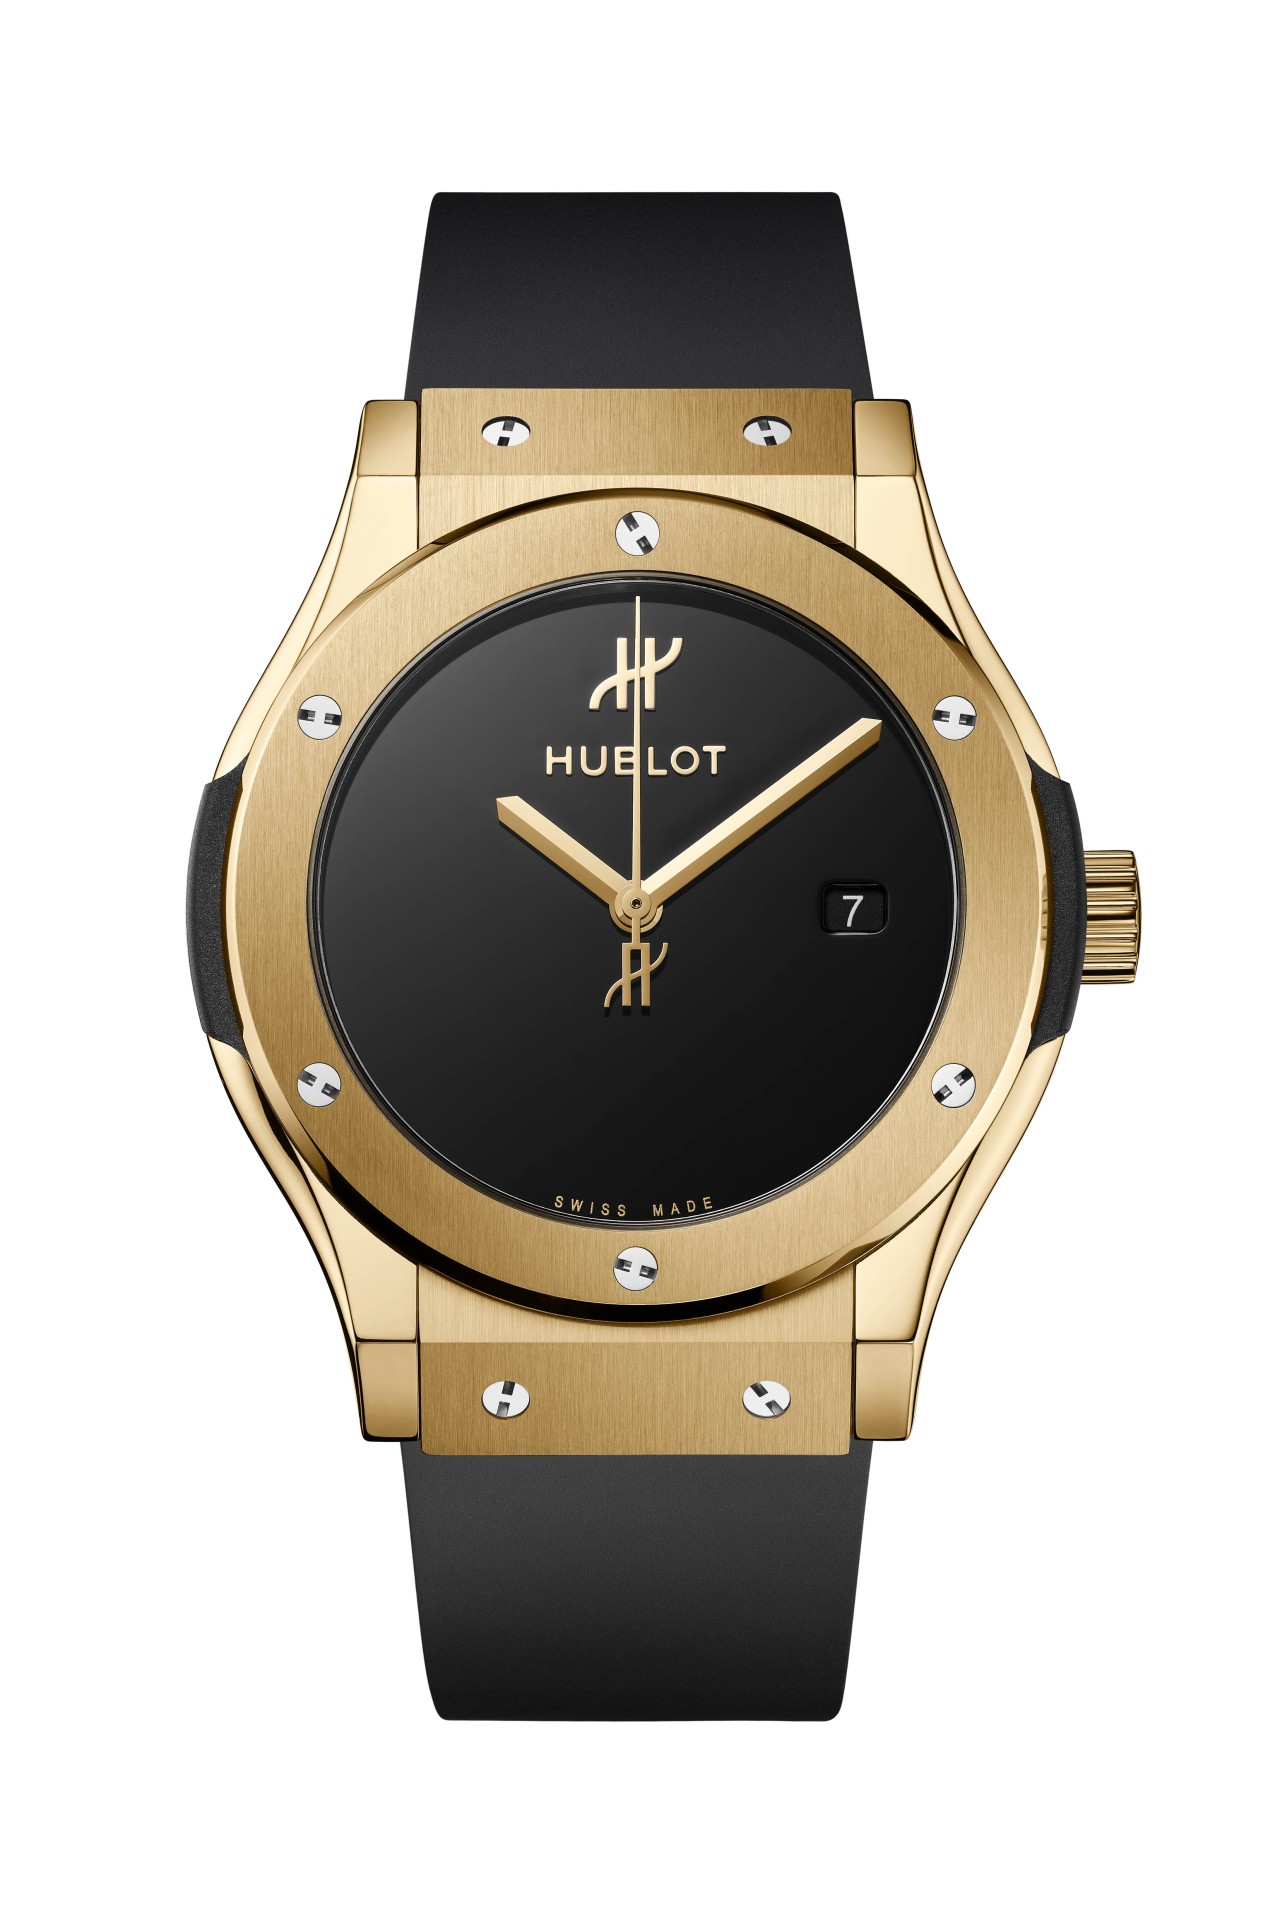 Hublot Timepieces from This Year's LVMH Watch Week – Signé Magazine